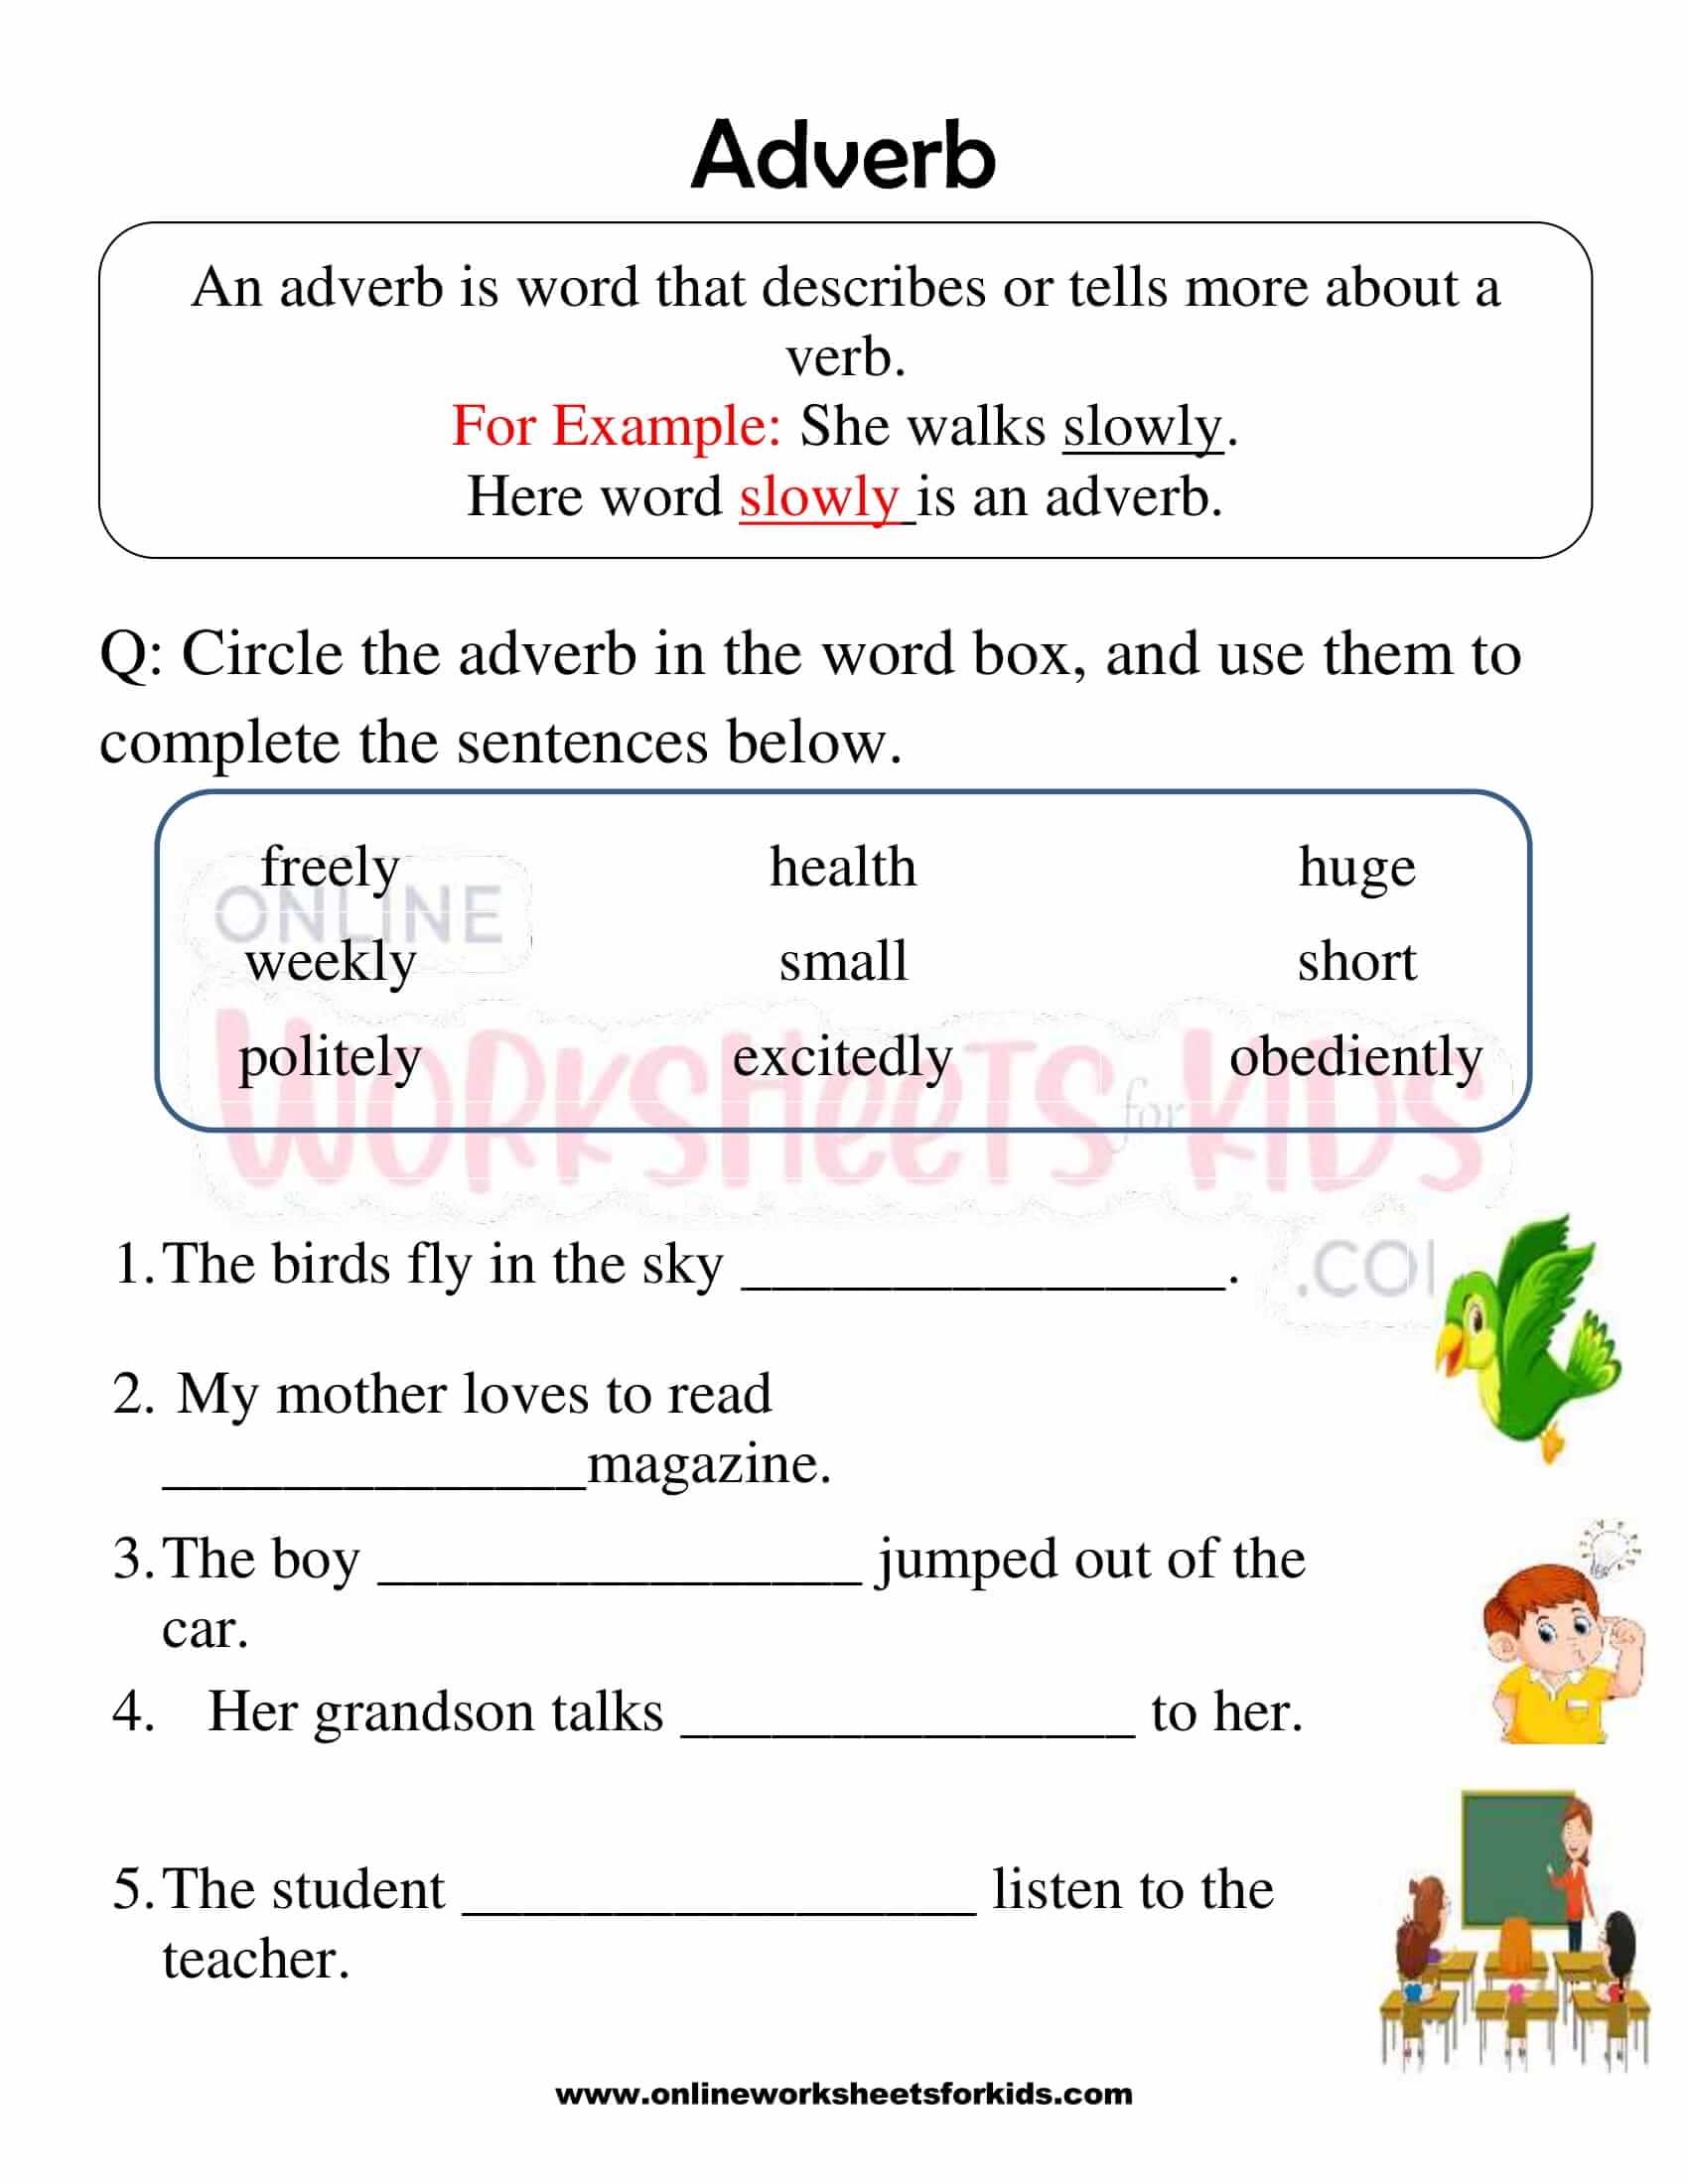 using-adverbs-worksheets-k5-learning-printable-adverb-worksheets-for-2nd-grade-your-home